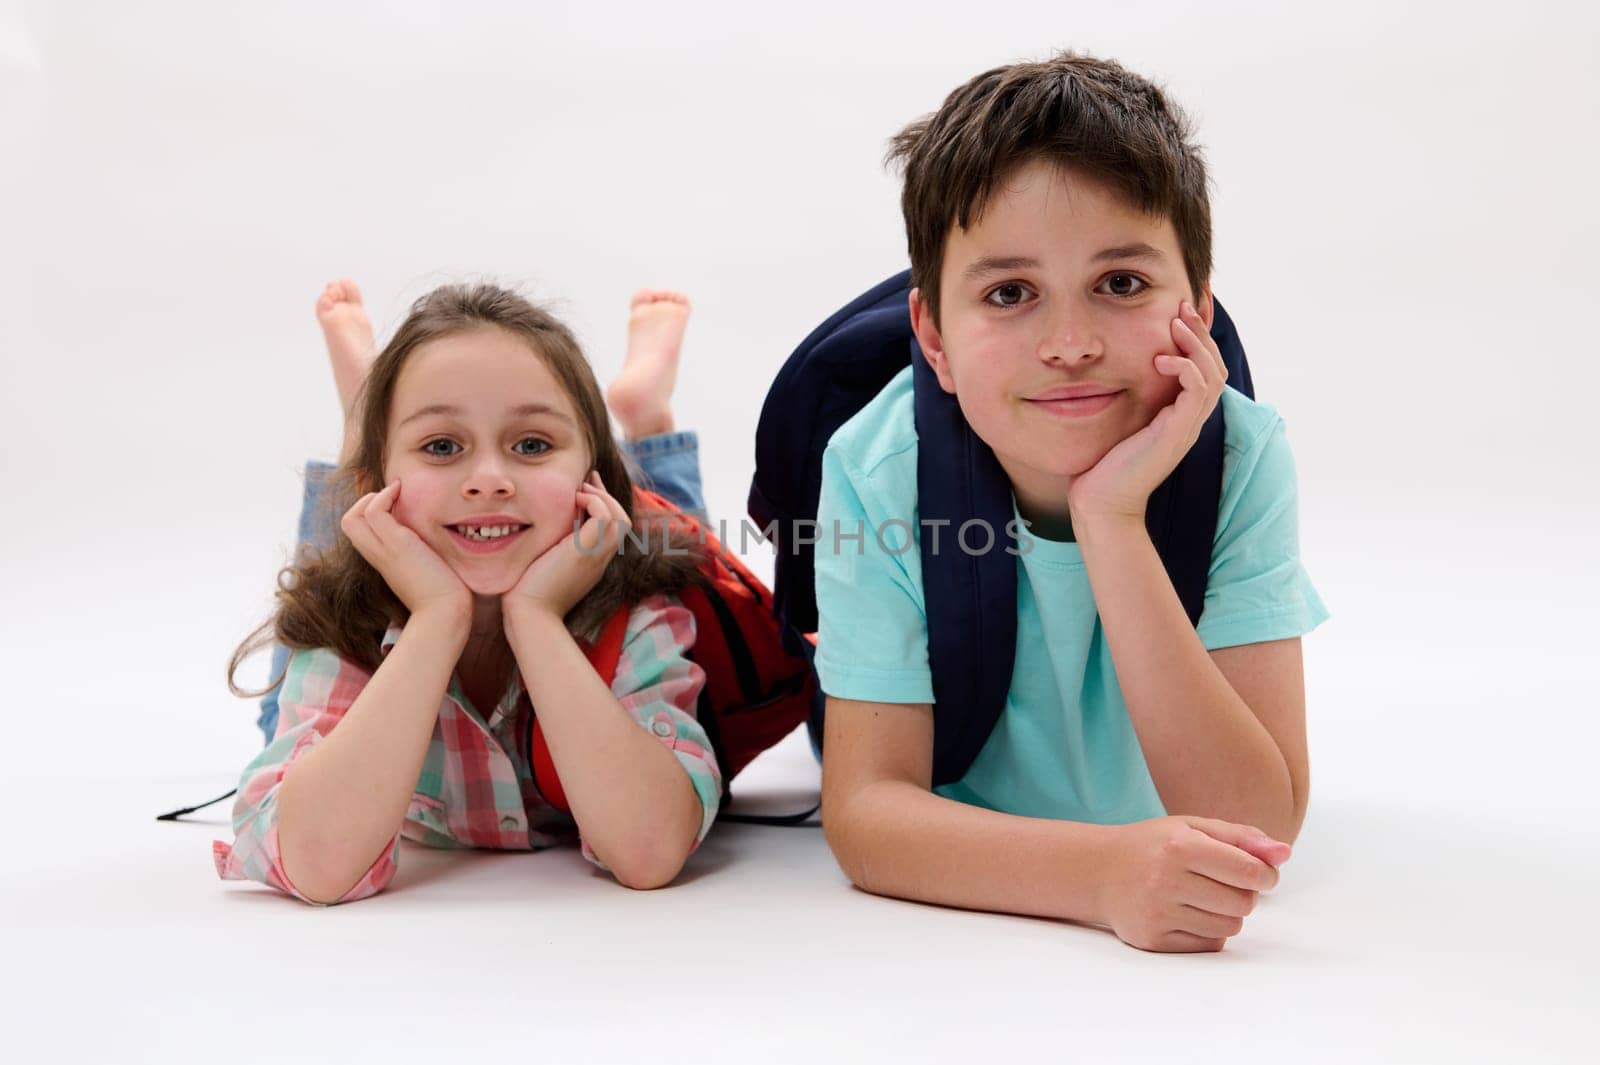 Smart school children, first grader - Caucasian little kid girl 6 years old and Hispanic teenage boy, lying on belly, smiling looking at camera, isolated on white background. Back to school concept